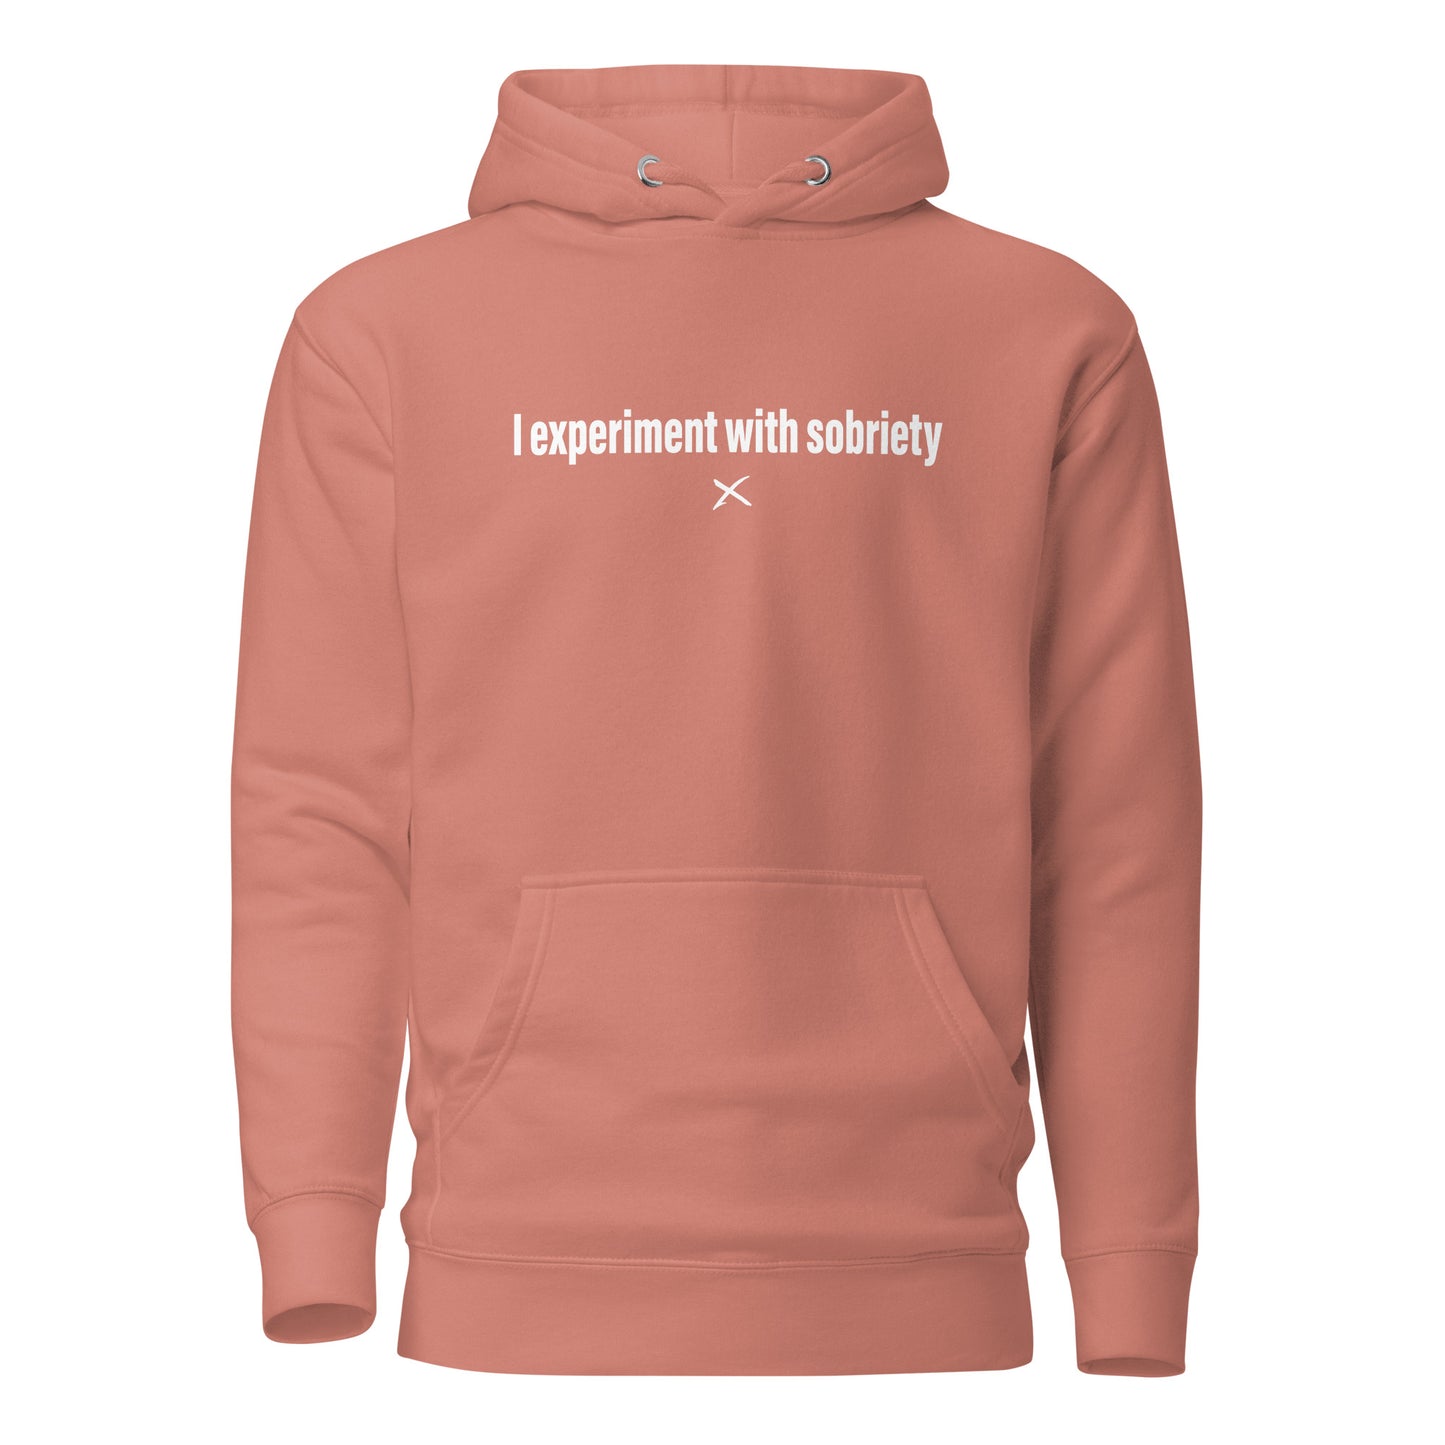 I experiment with sobriety - Hoodie